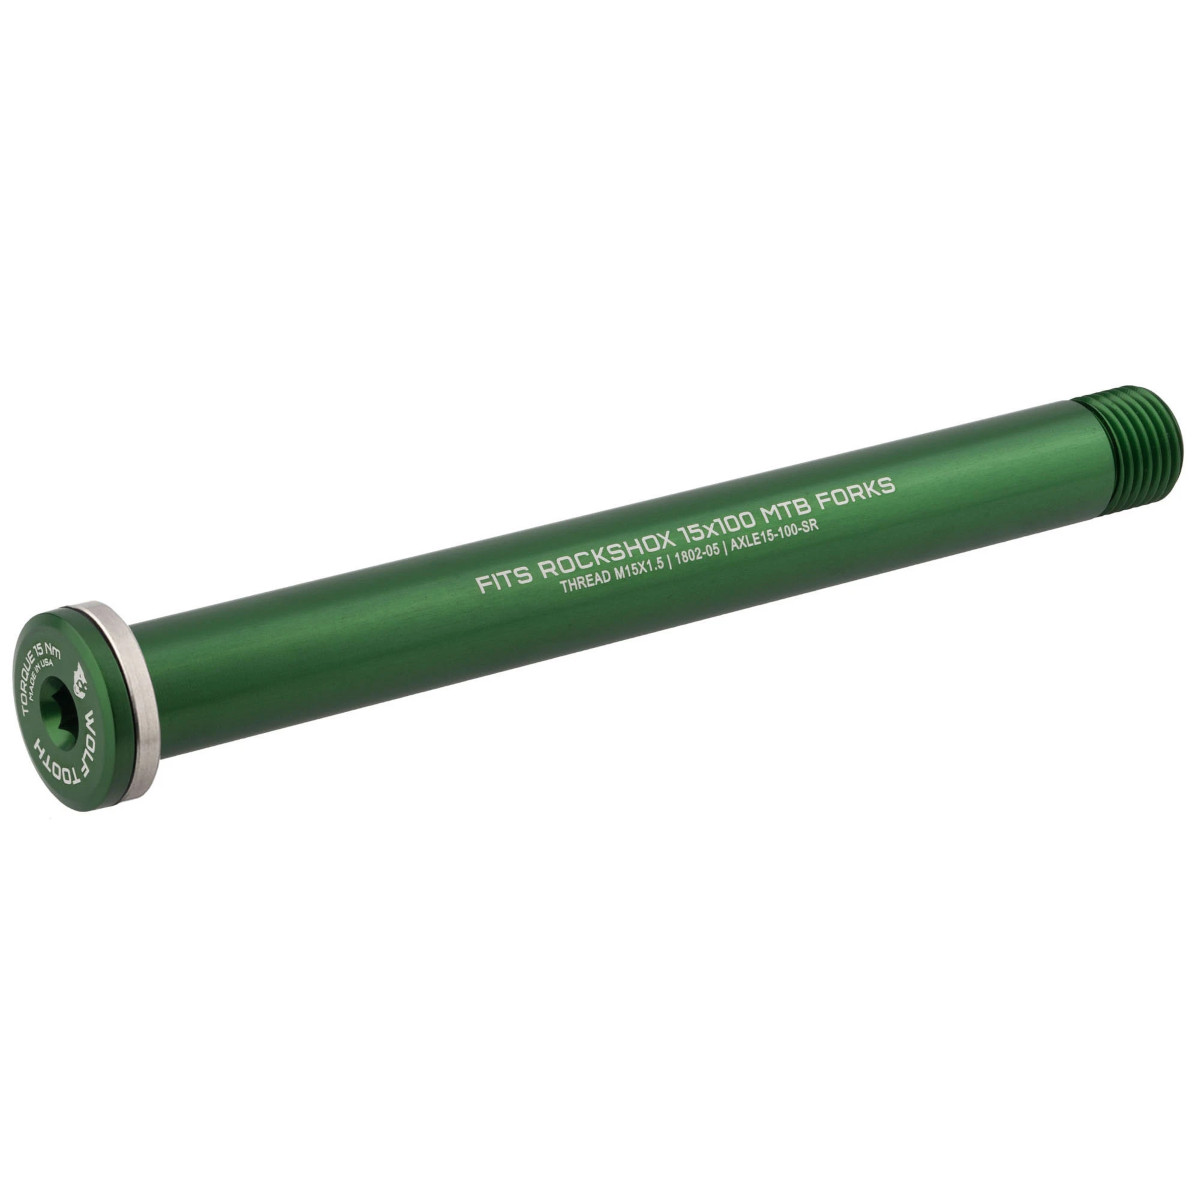 Productfoto van Wolf Tooth Thru Axle for RockShox Forks - 15x100mm - green